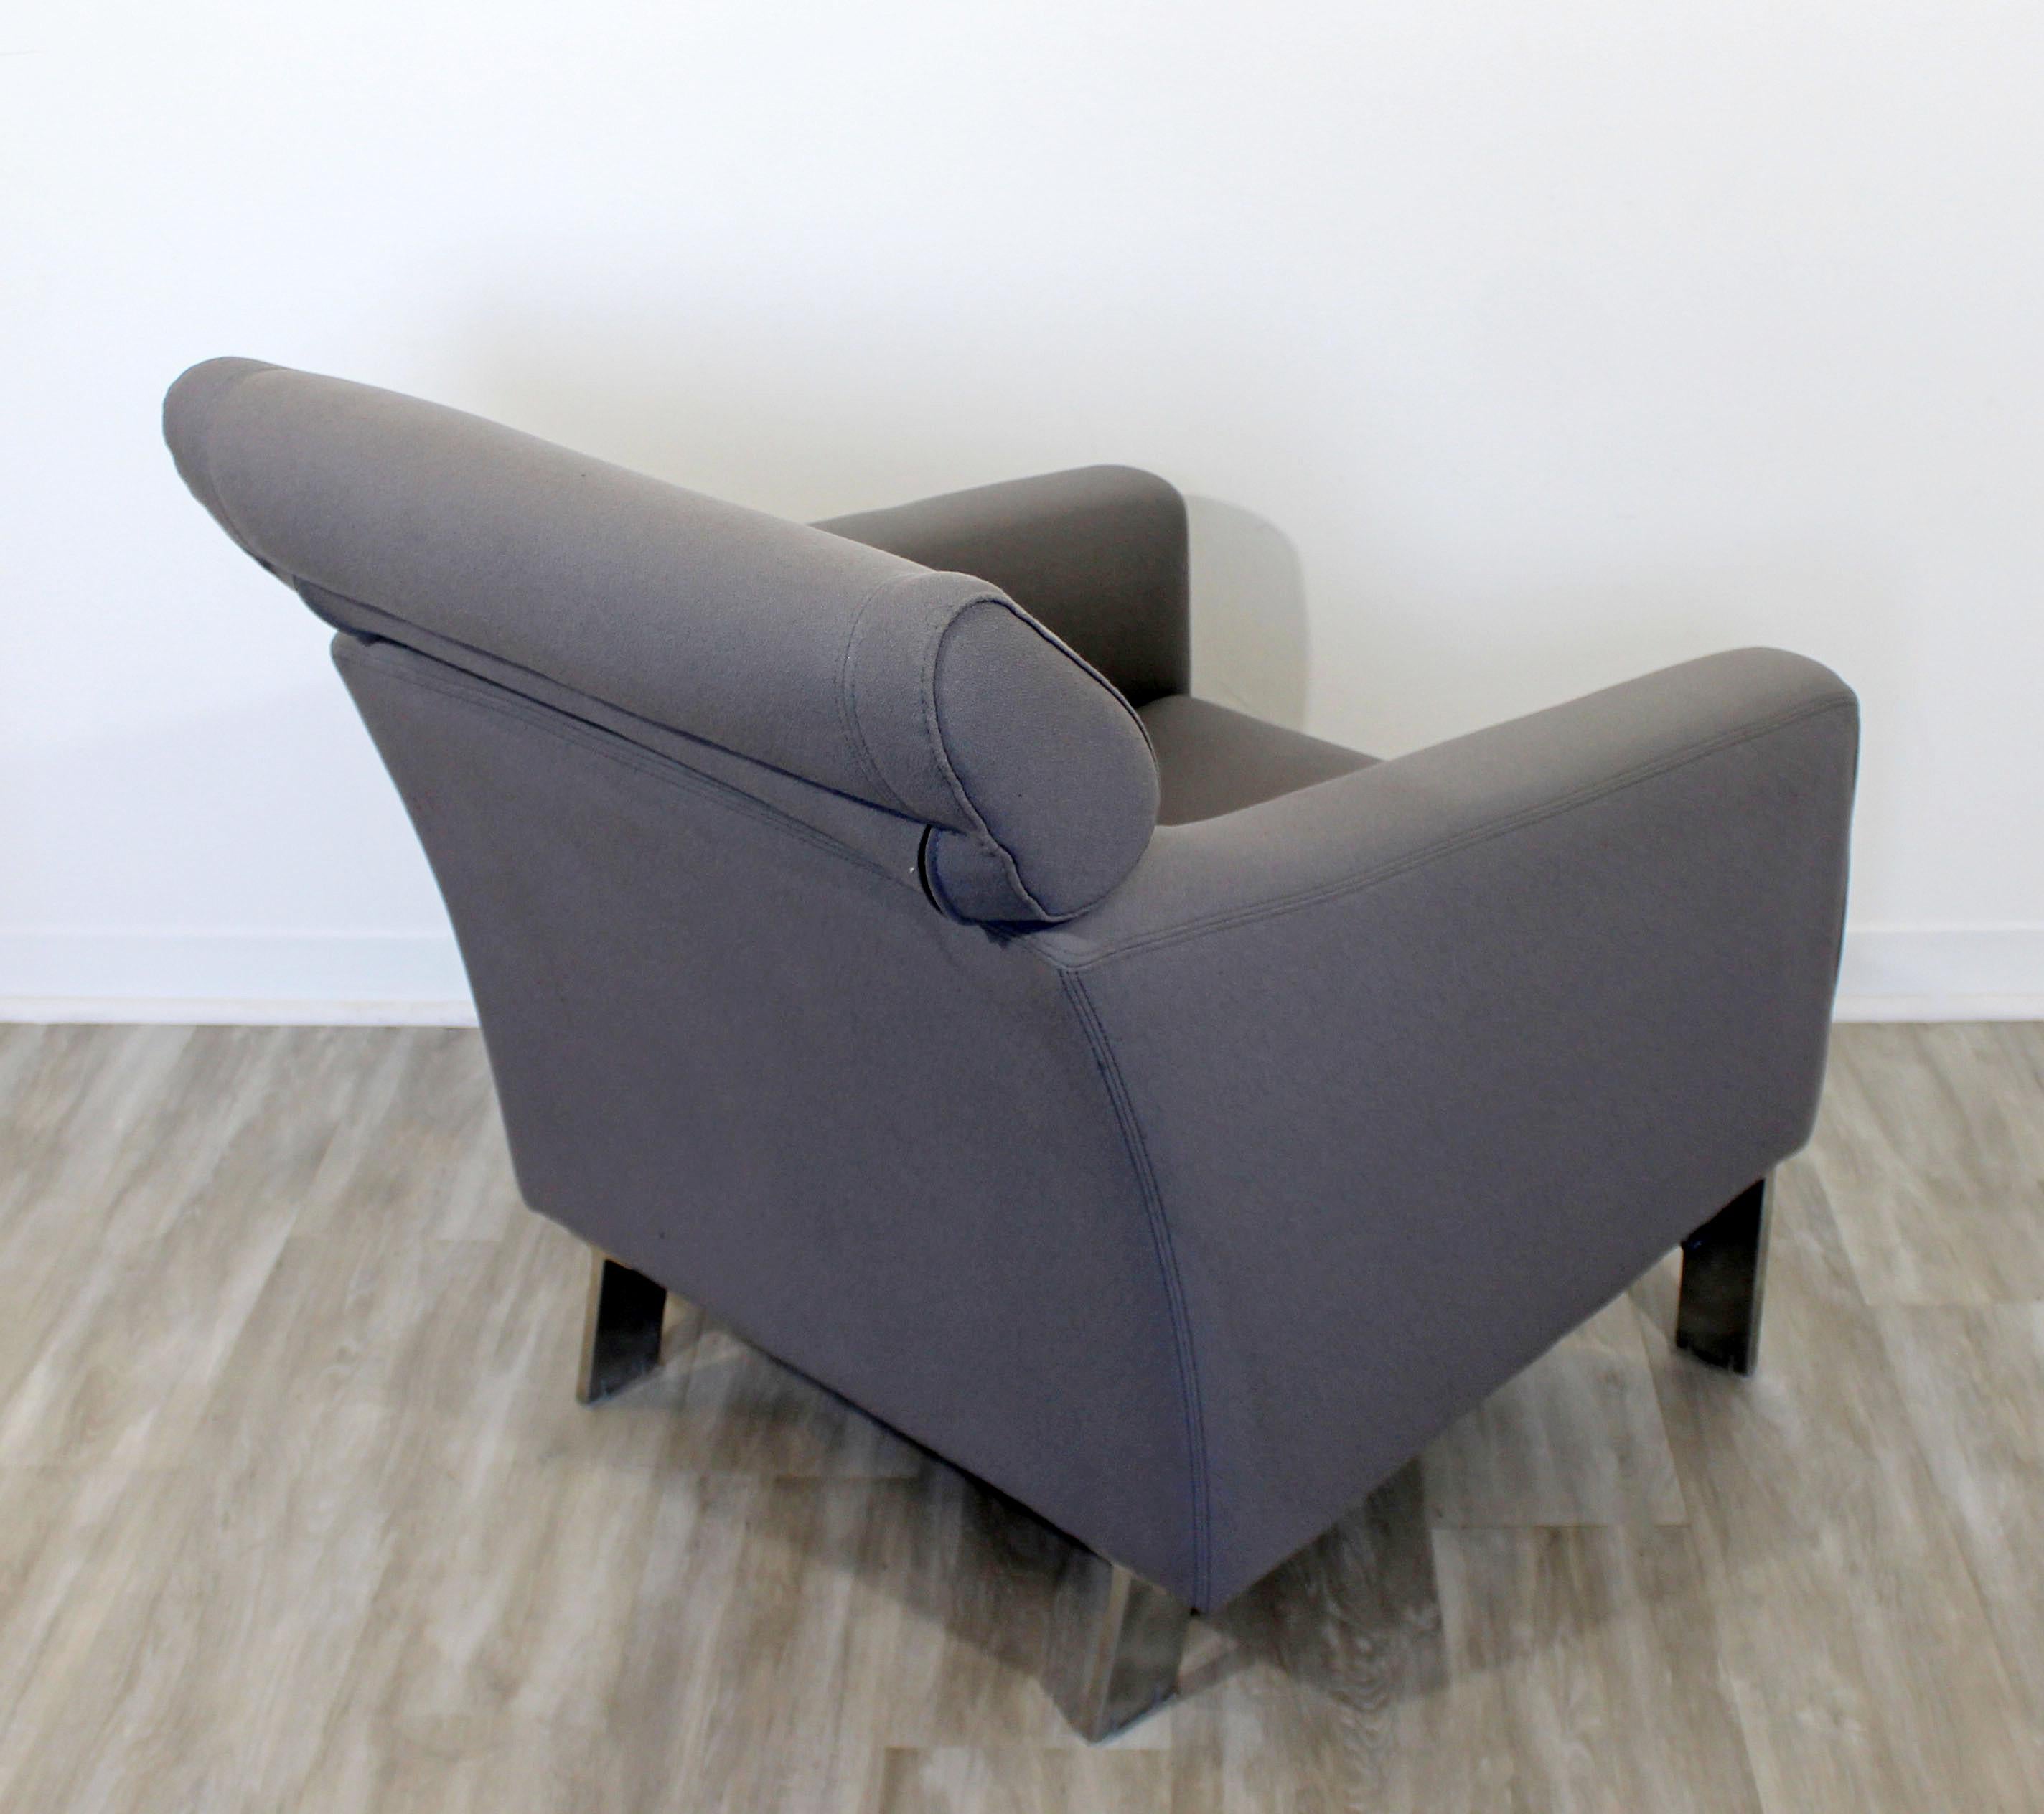 Upholstery Contemporary Modern Gray Patachou Lounge Armchair by Leolux Sculptural, 1980s